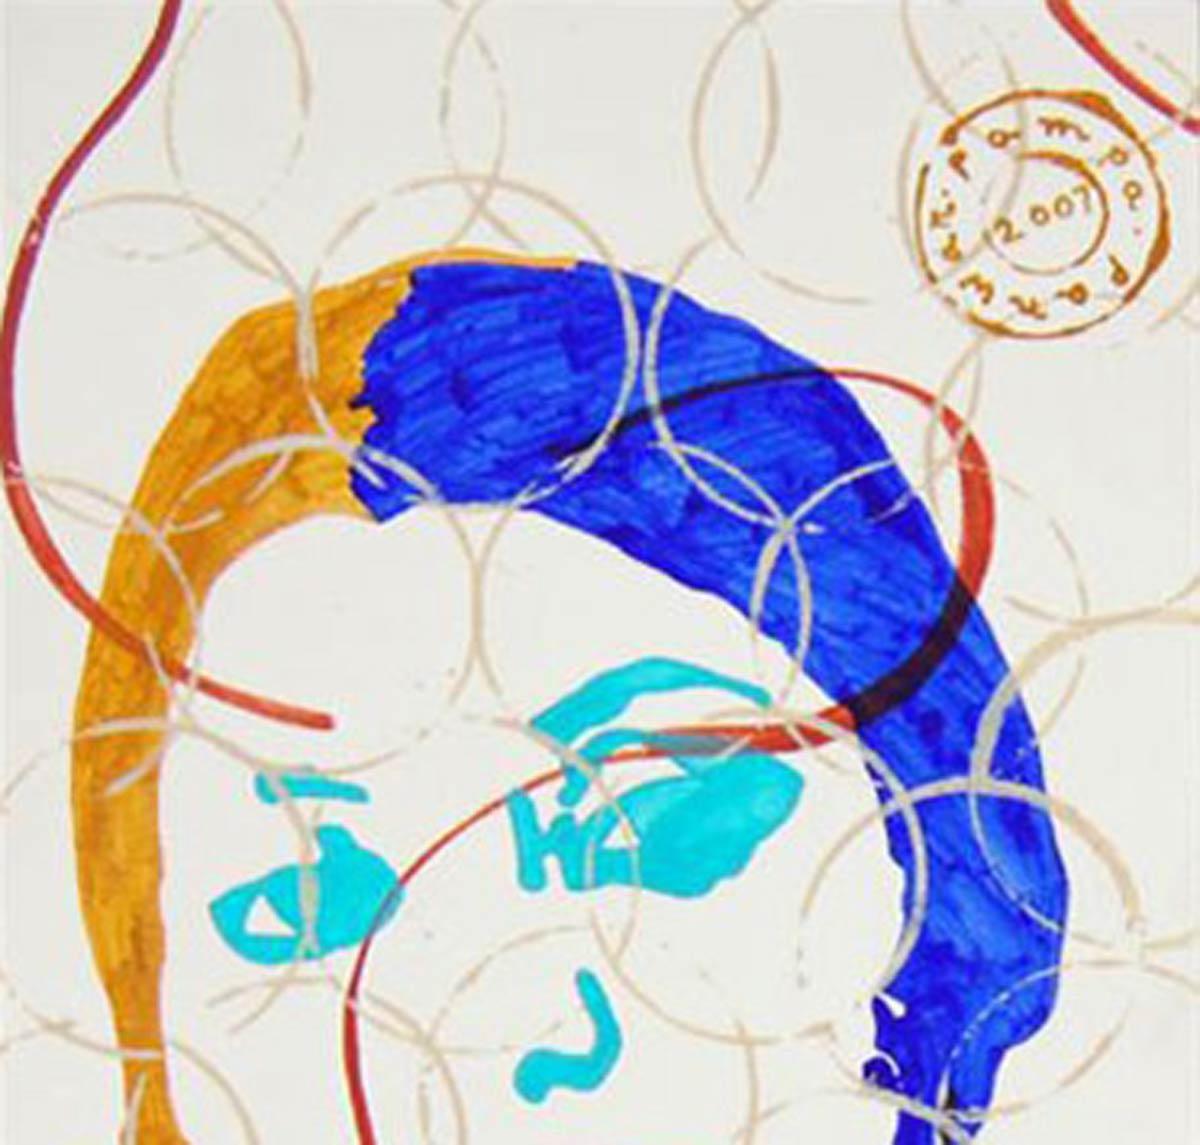 Women Face, Acrylic Painting, Blue, Brown, Red by Indian Artist 